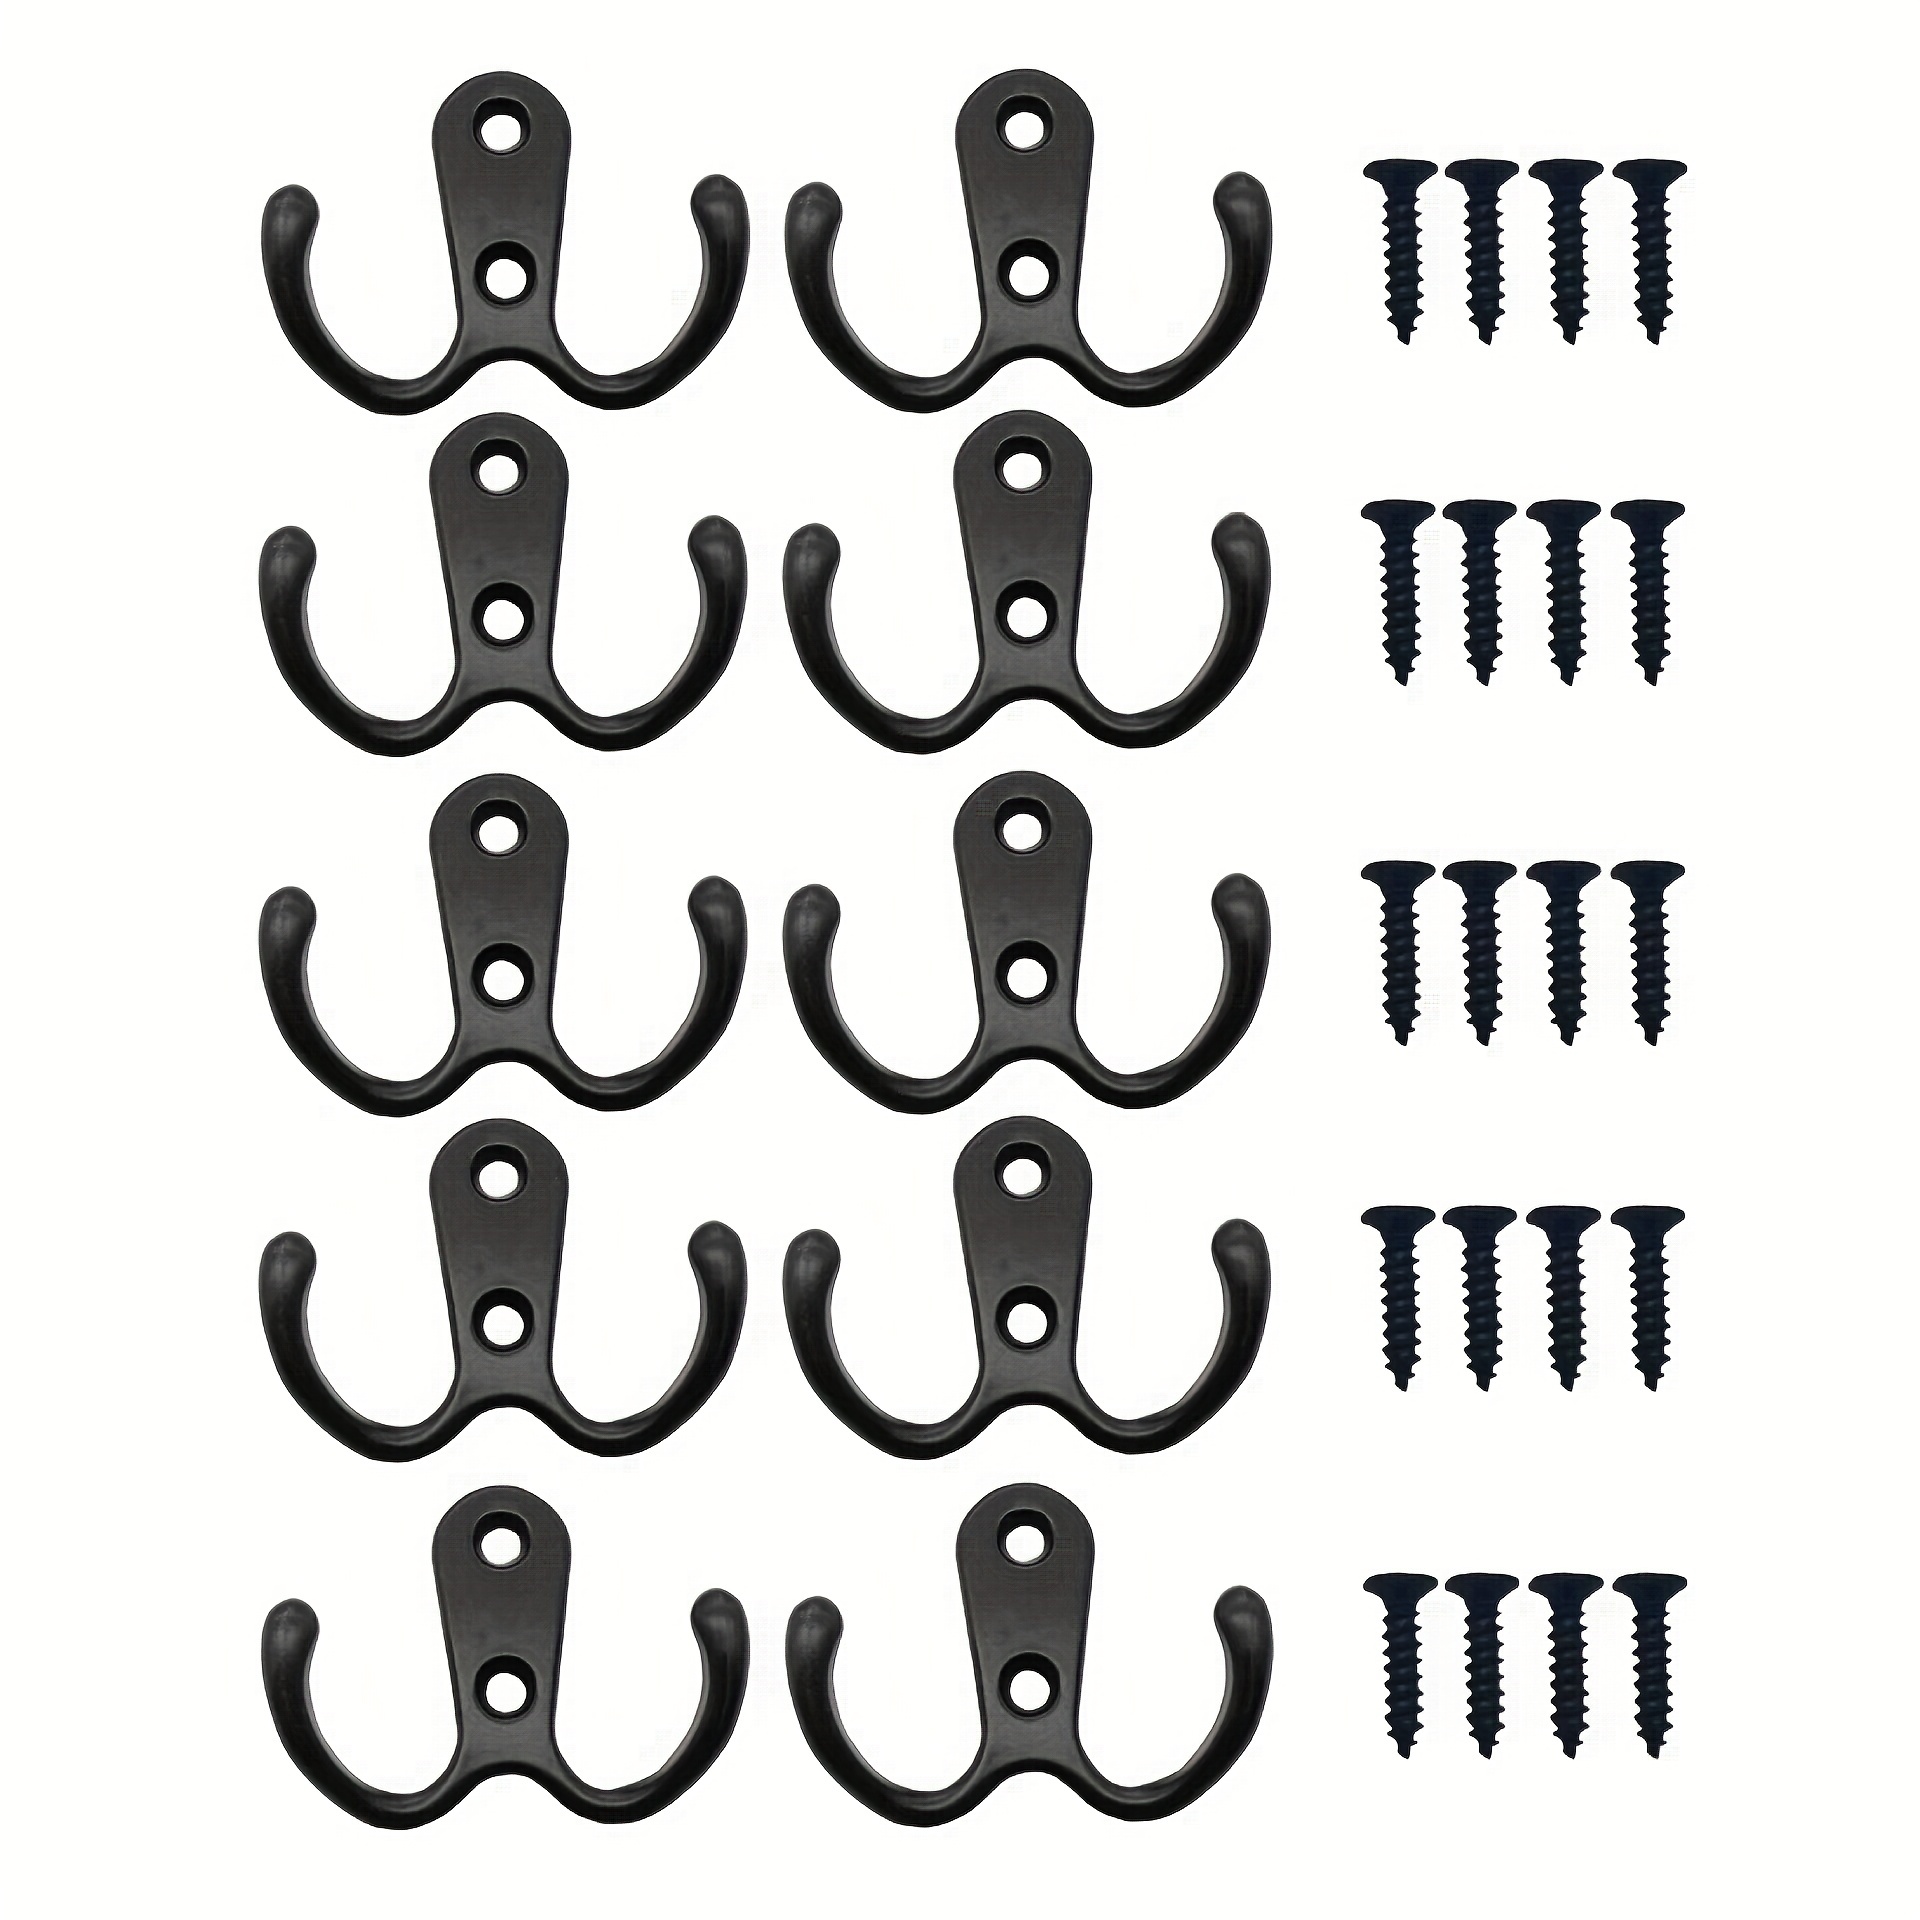 Coat Hook, Metal Coat Hooks Wall Mounted Hooks for Hanging Coats with  Installation Screws Stainless Steel Decorative Hangers for Hanging Clothes